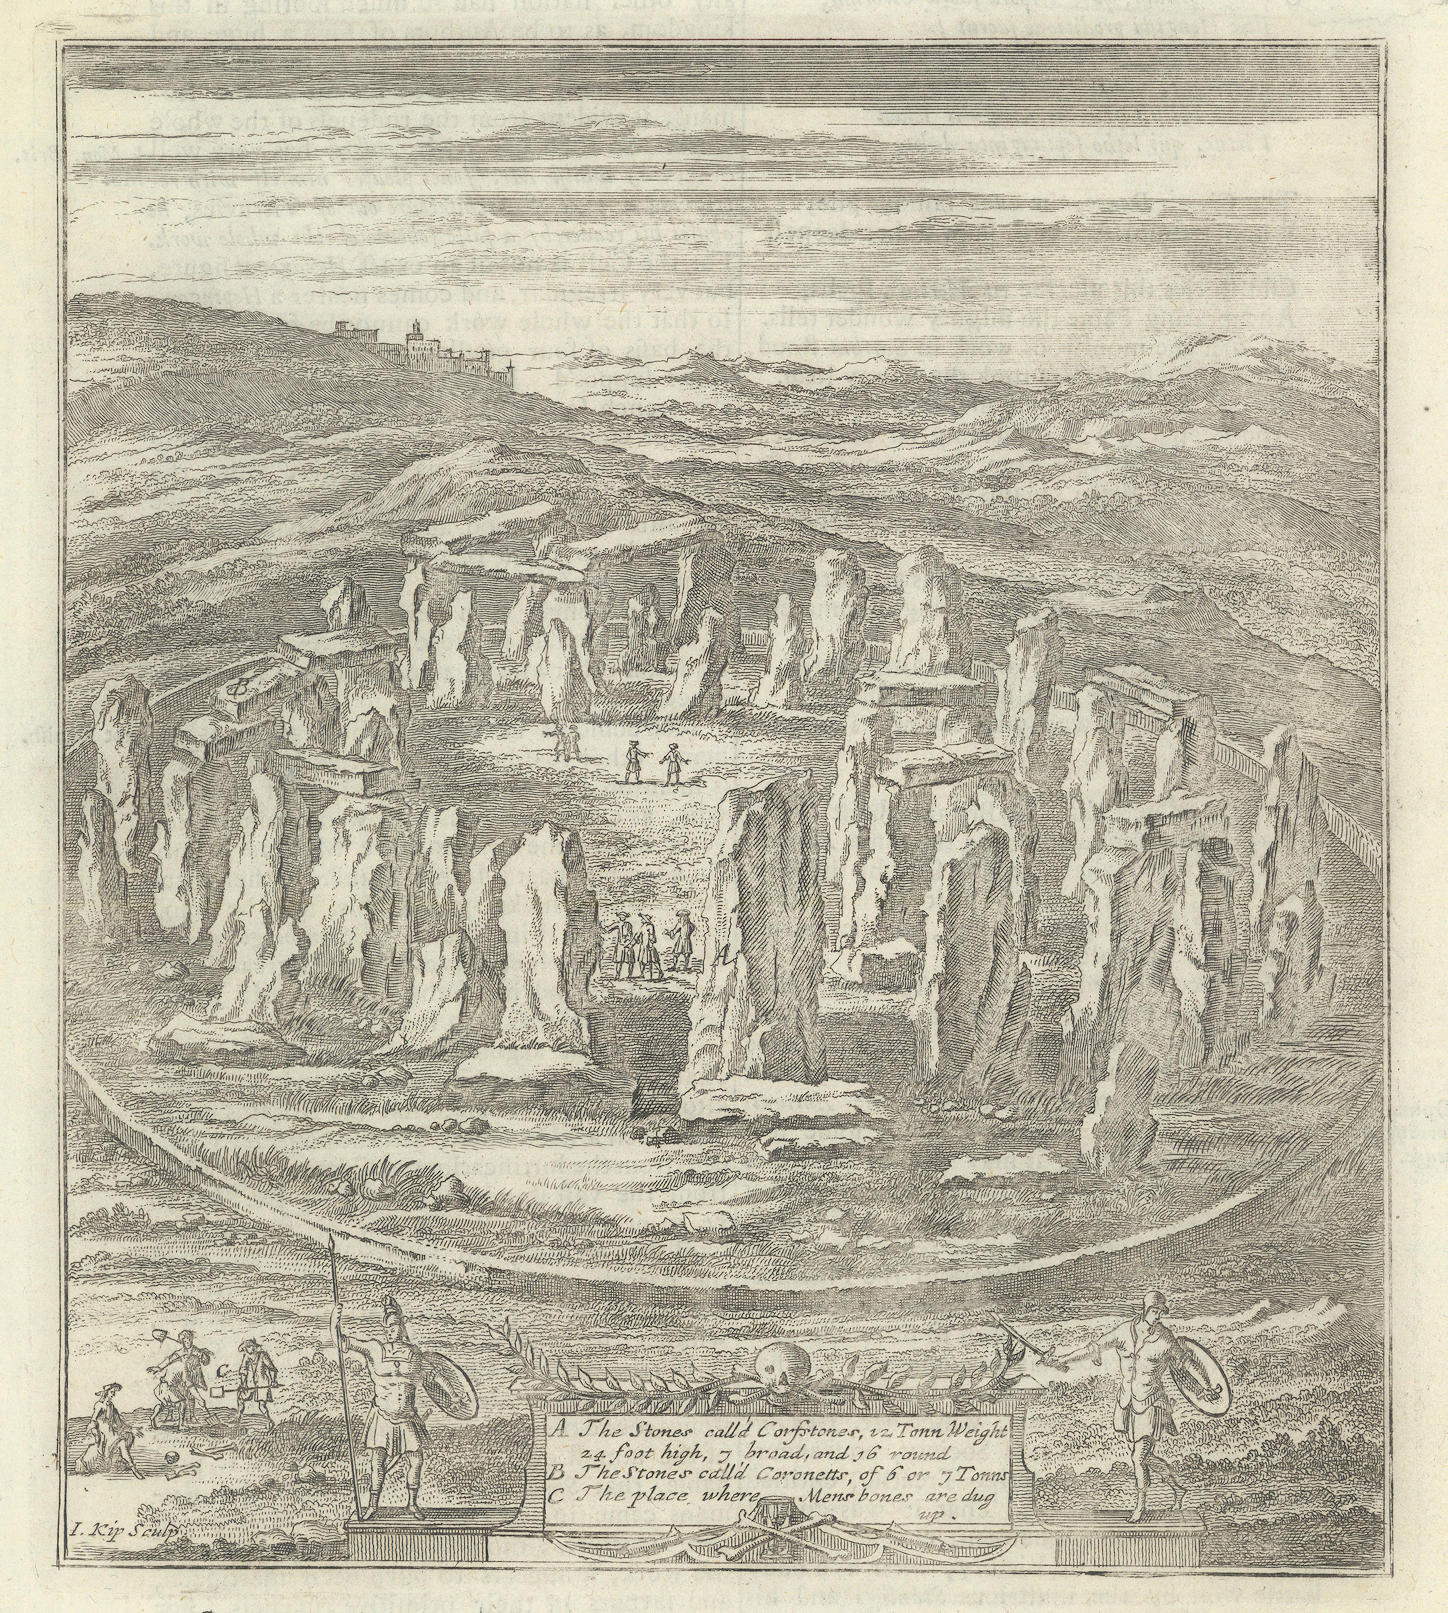 Associate Product View of Stonehenge from Camden's Britannia by Kip 1722 old antique print